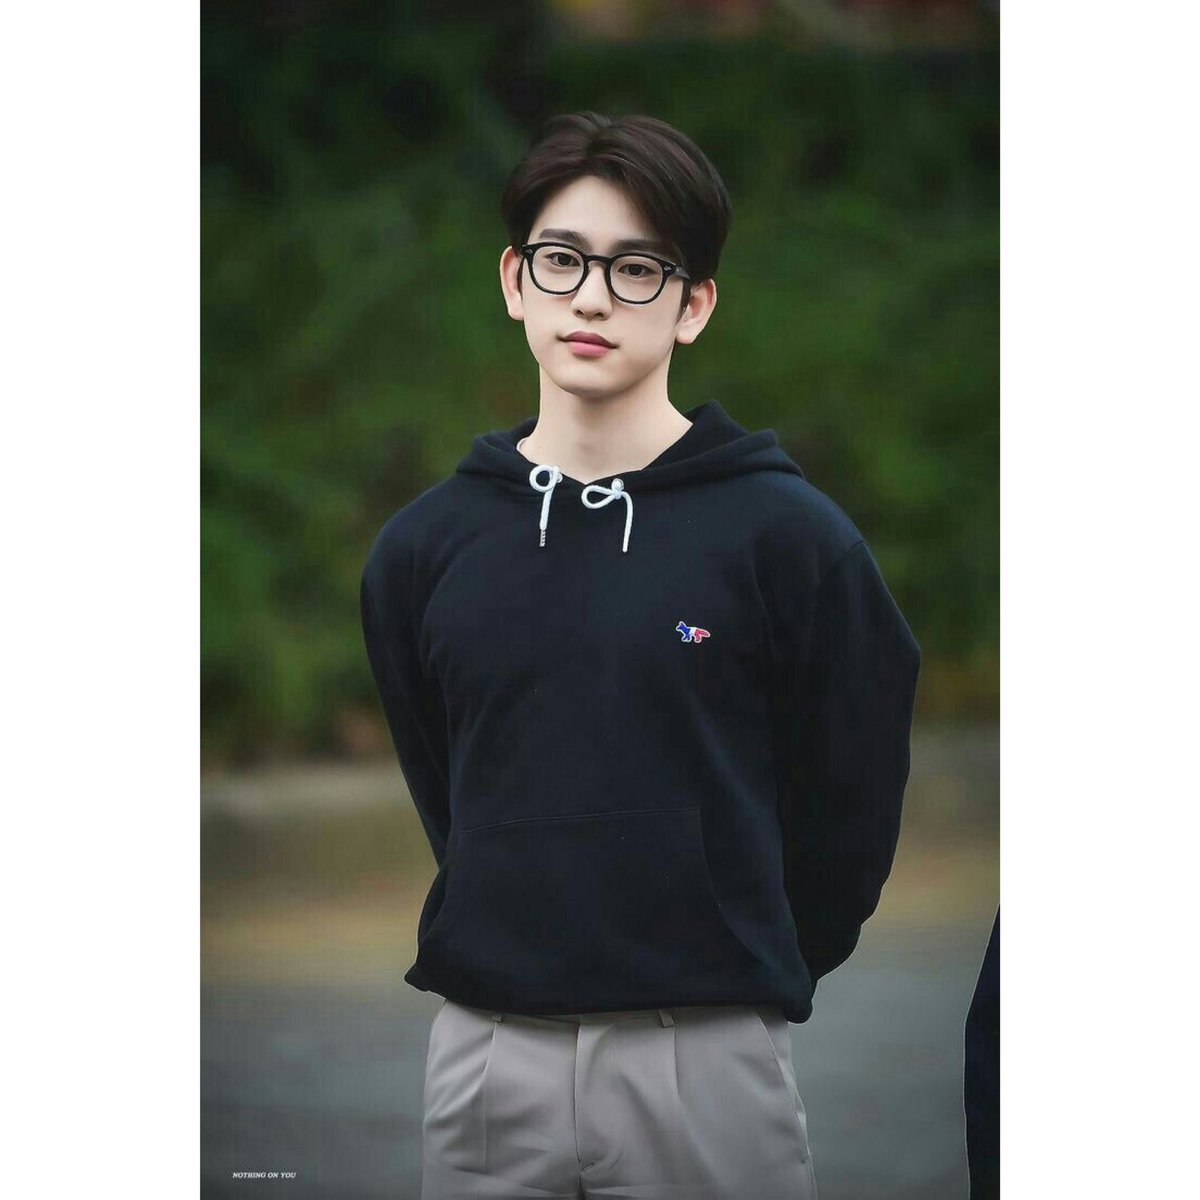 D-528 until Jinyoung gets discharged 

🏠: 7. November 2024

🖼️: black clothes🖤

#JINYOUNG #ParkJinyoung #진영 #GOT7 #GOT7FOREVER #AHGASES #ahgase #IGOT7  

Follow & turn on the 🔔 to not miss any daily countdown :)